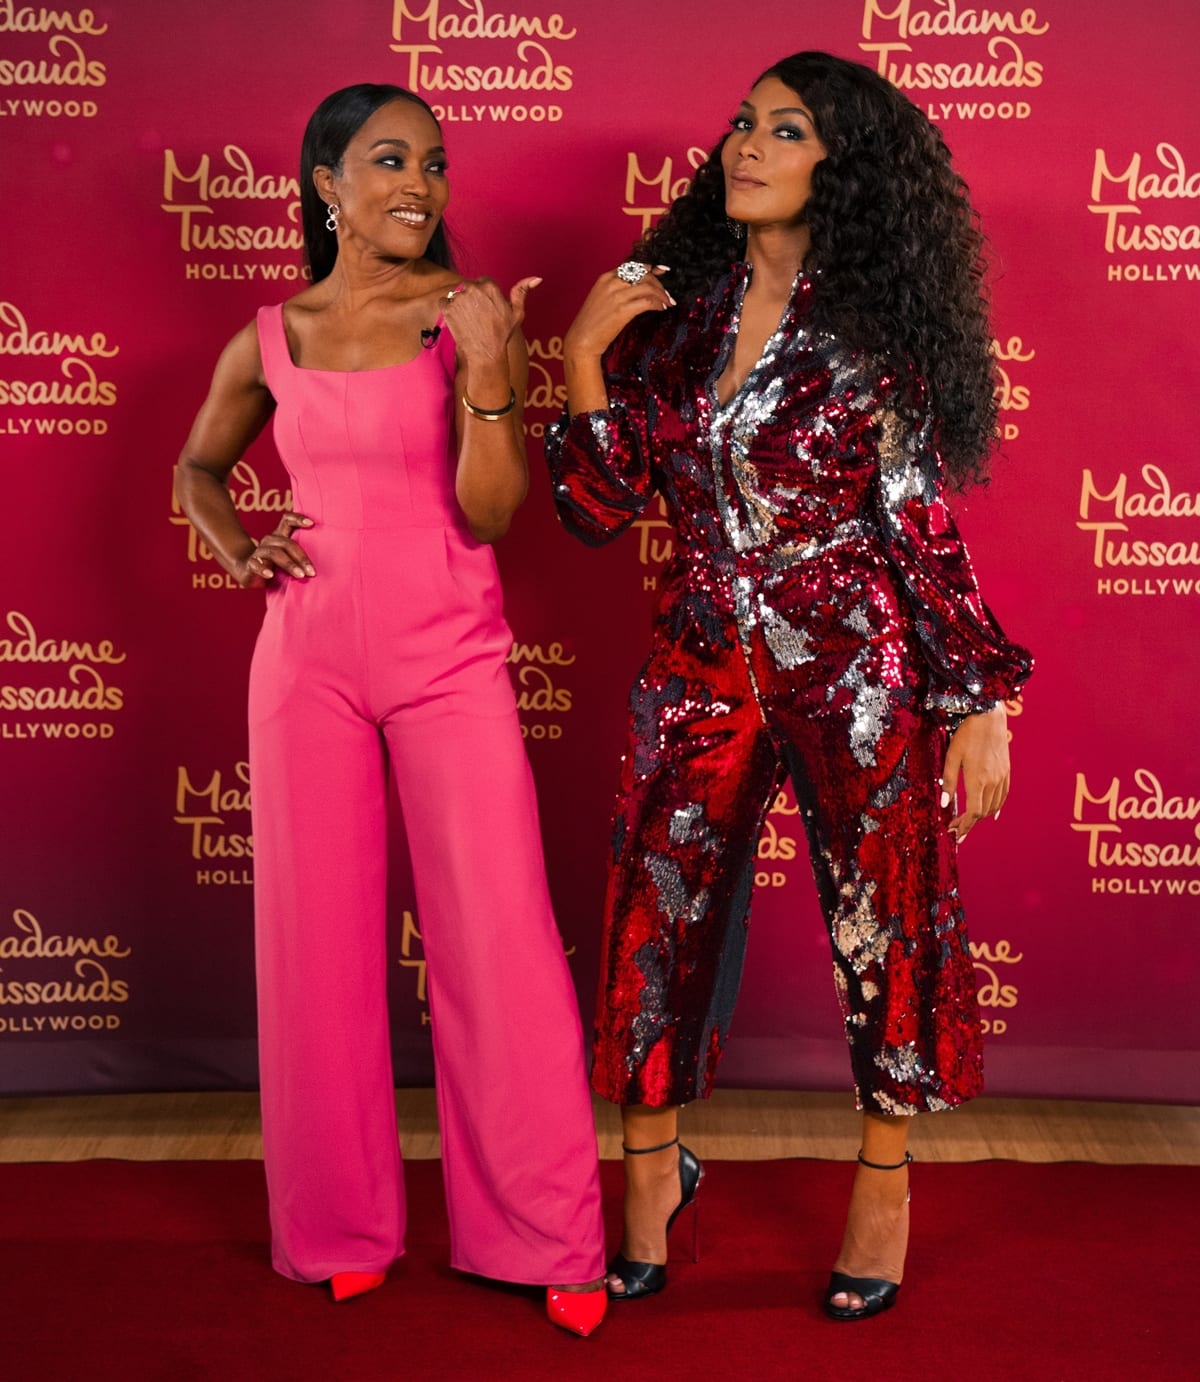 Angela Bassett's wax figure at Madame Tussauds Hollywood is wearing a sequin jumpsuit by Greta Constantine with shoes by Casadei